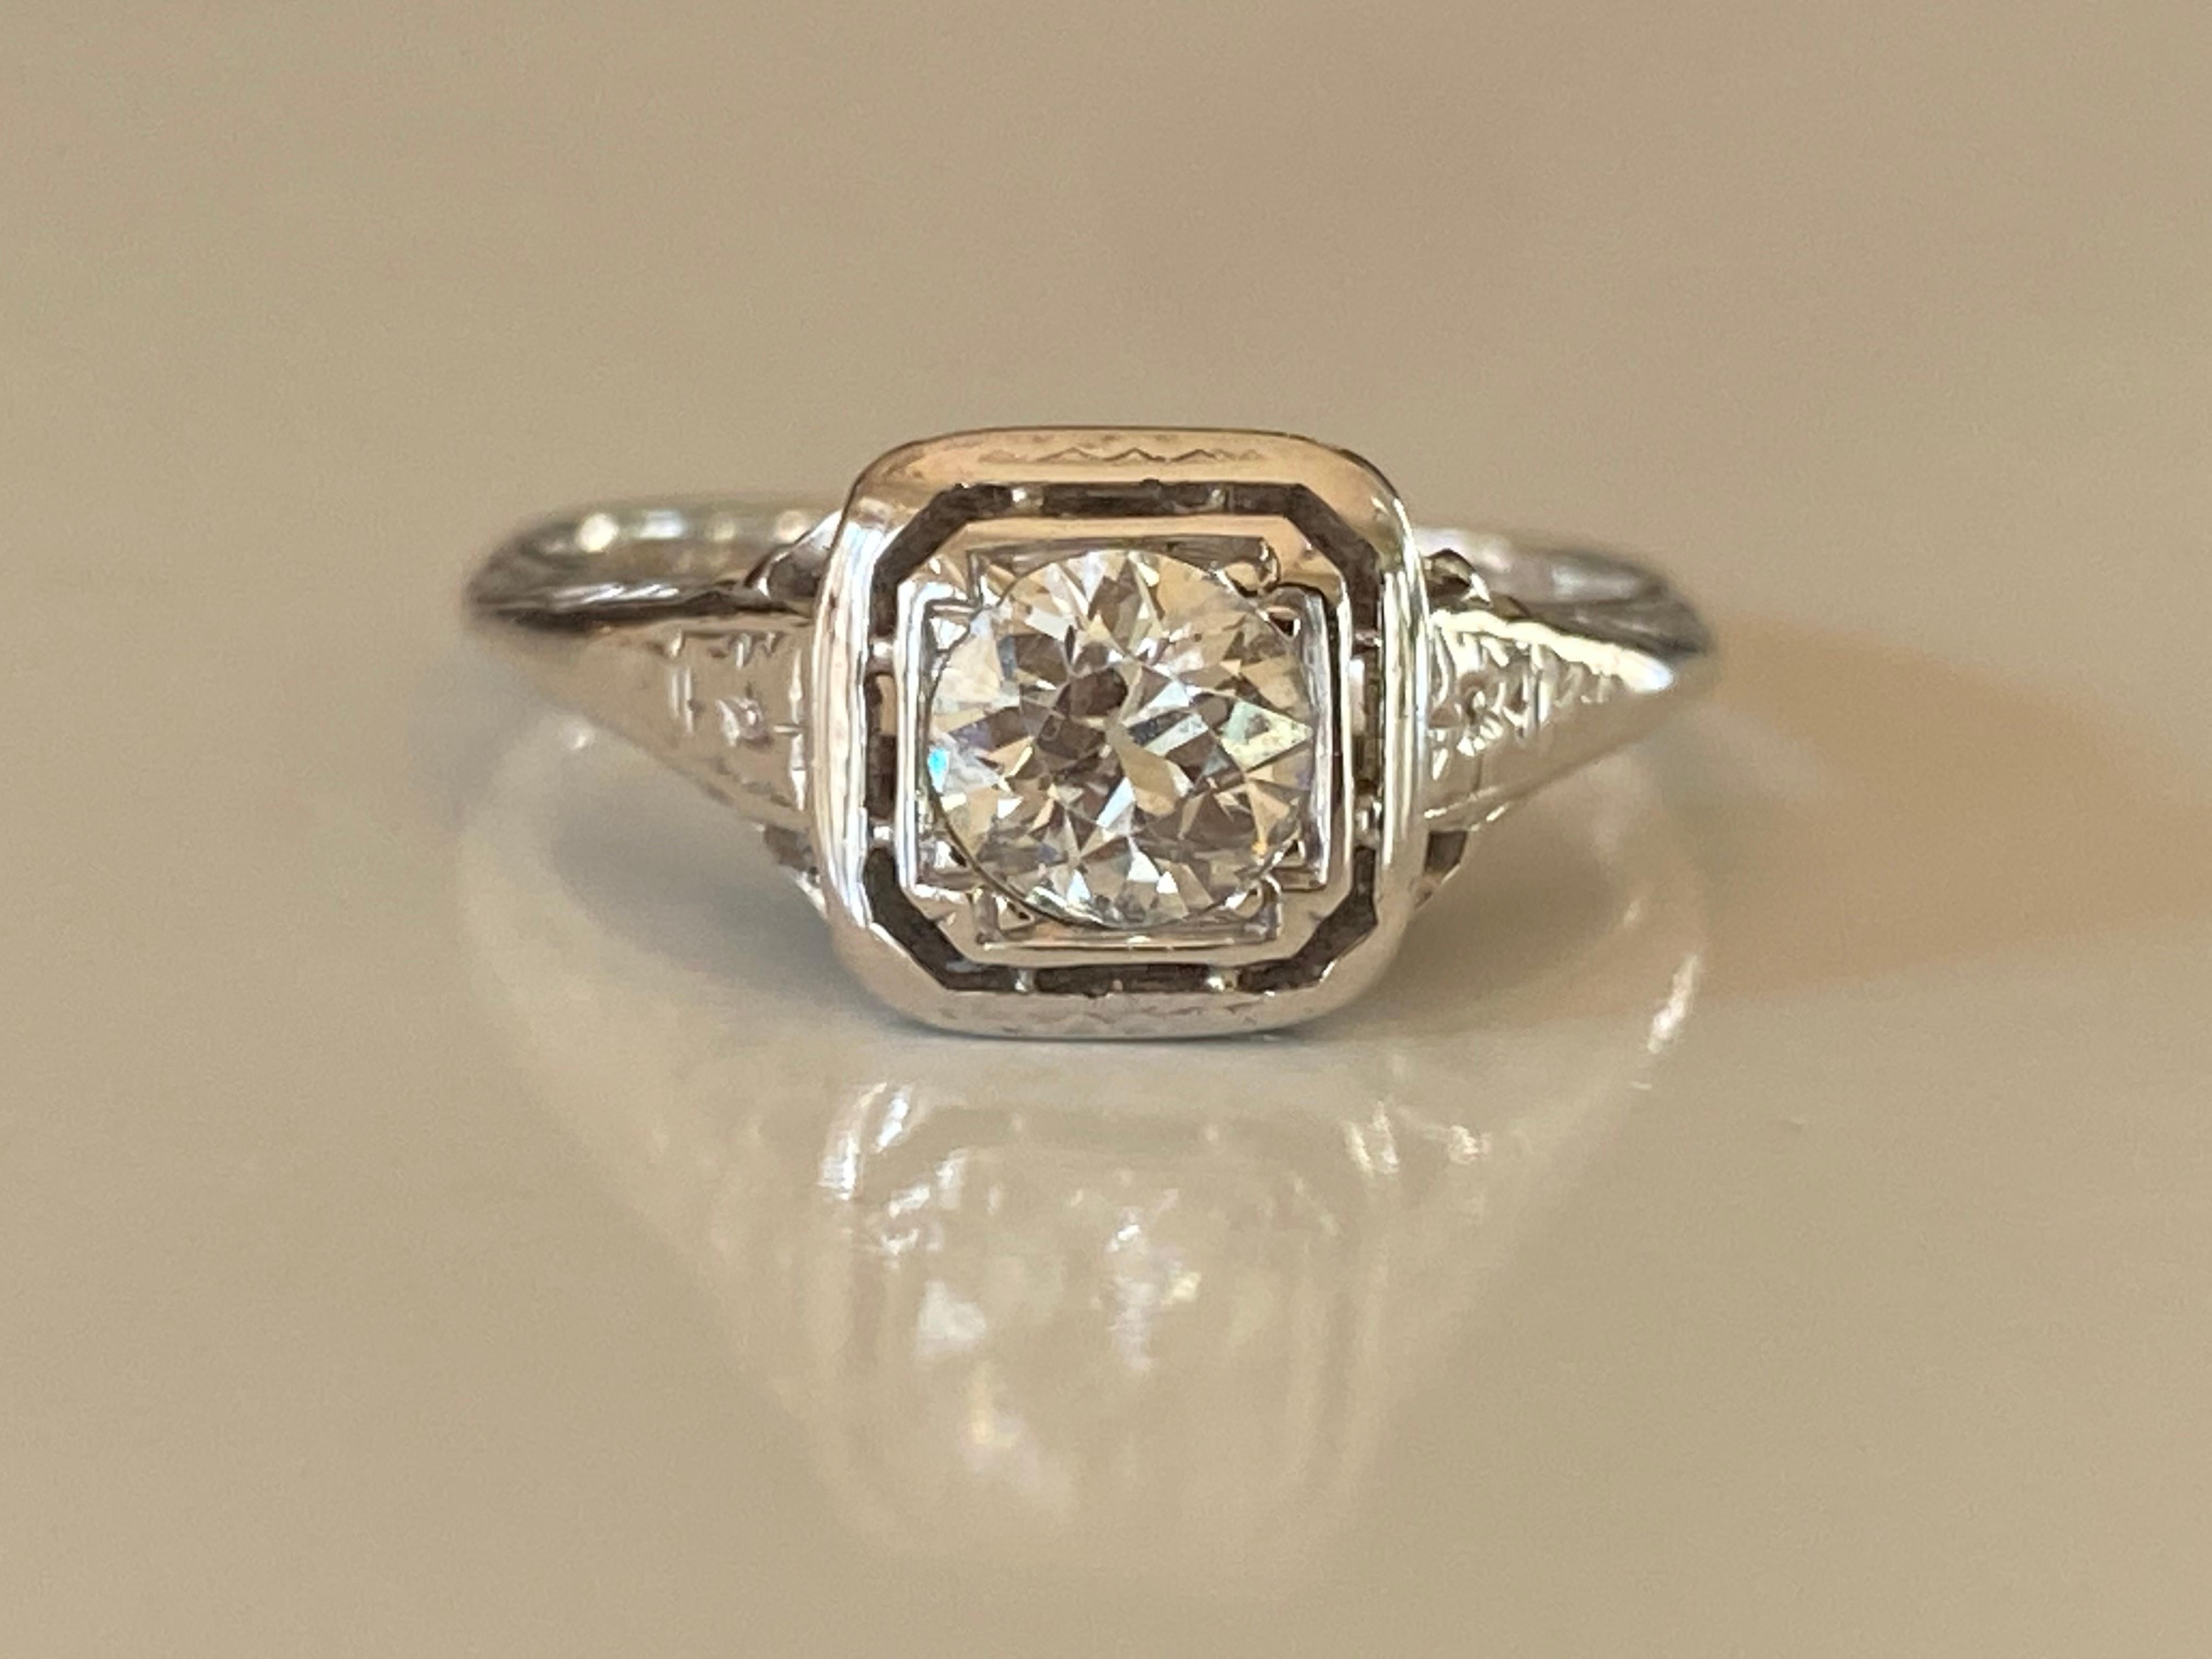 Crafted in the 1920s in 18K white gold, this striking Art Deco solitaire ring features an Old European cut diamond center stone totaling approximately 0.50 carats, I-J color, VS clarity and fine filigree.  